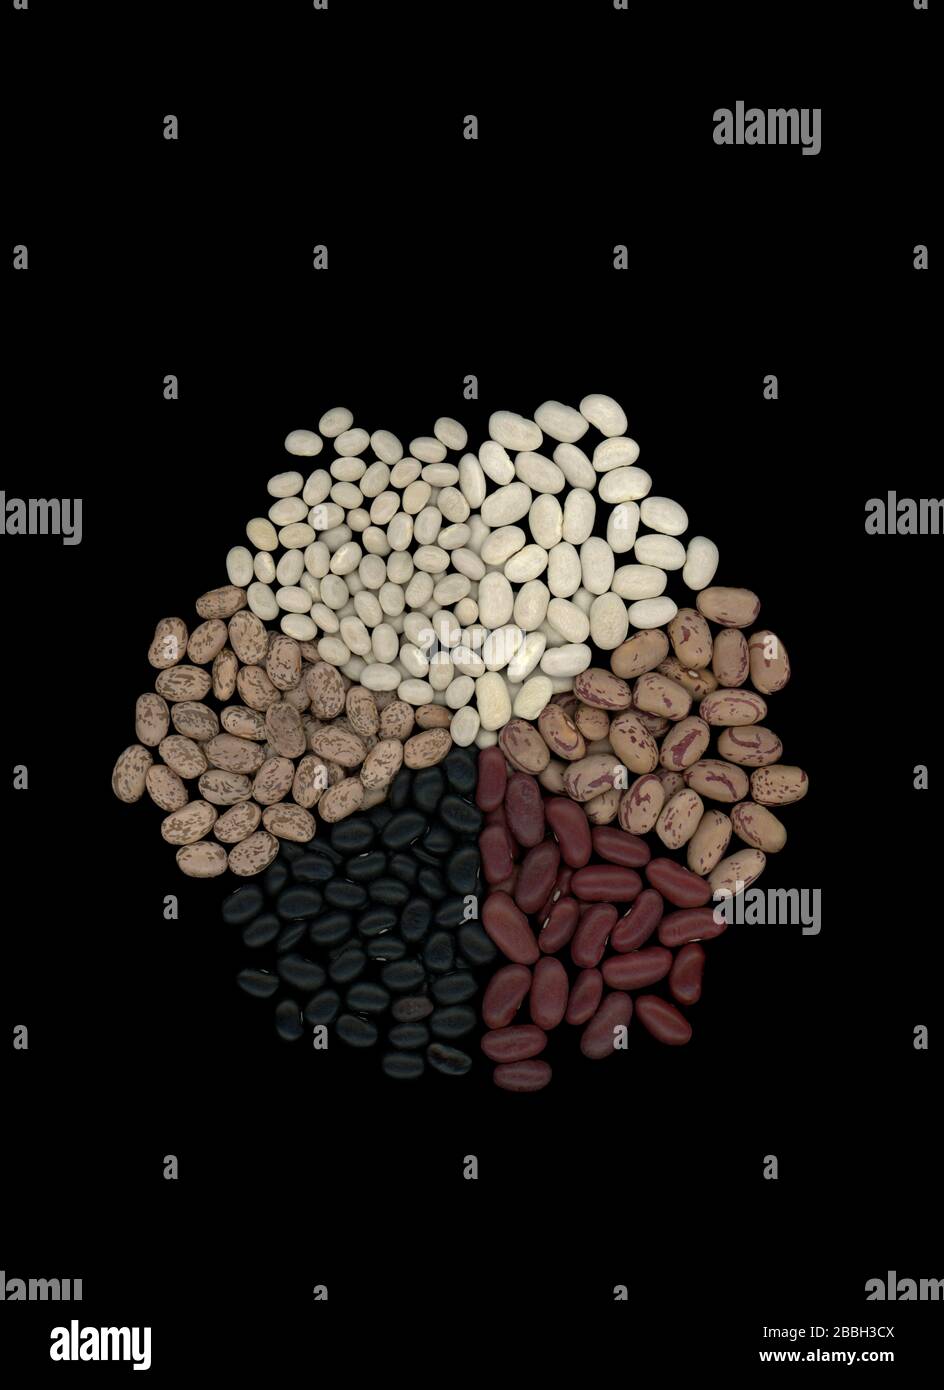 A group of dried beans or pulses grown in Canada. Six varieties of dried beans presented in a circle; black turtle beans, cranberry beans, dark red kidney beans, Great Northern beans, navy beans and pinto beans. Stock Photo